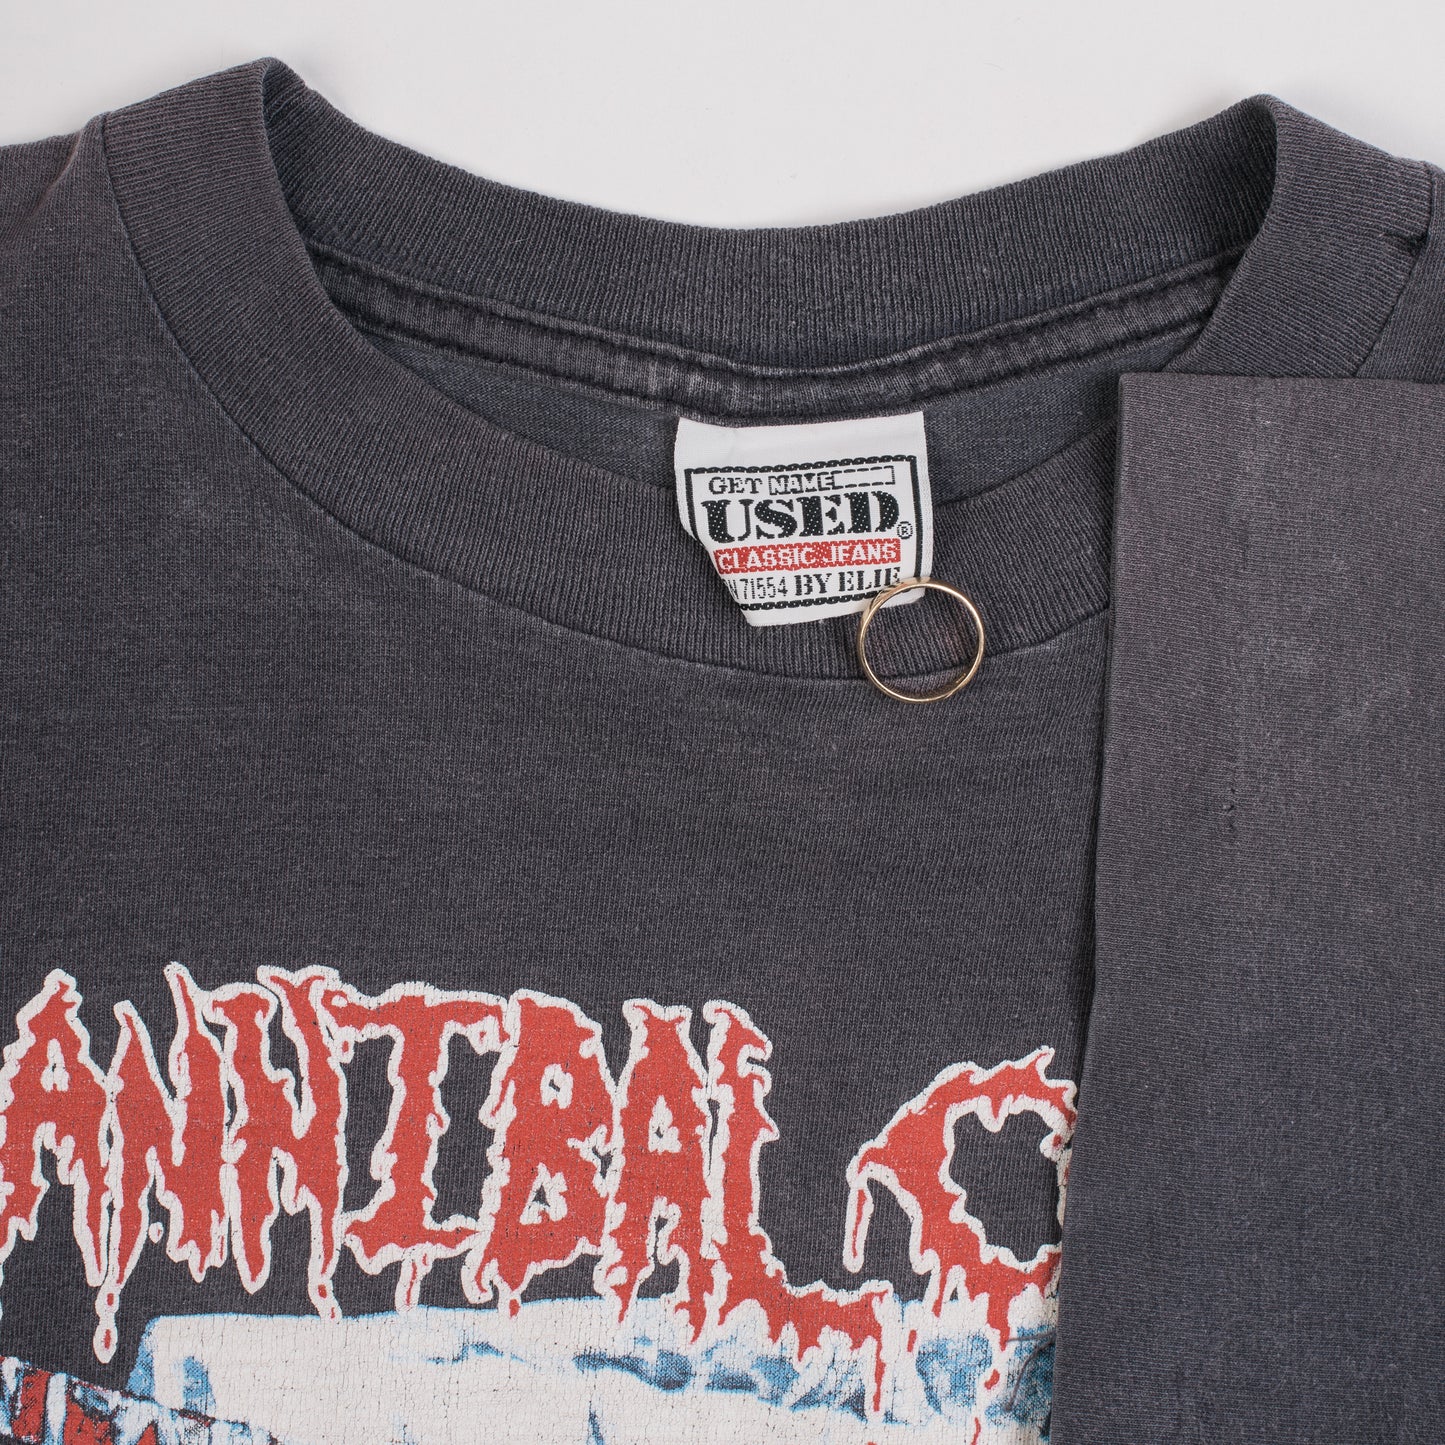 Vintage 1993 Cannibal Corpse Tomb Of The Mutilated Tour T-Shirt